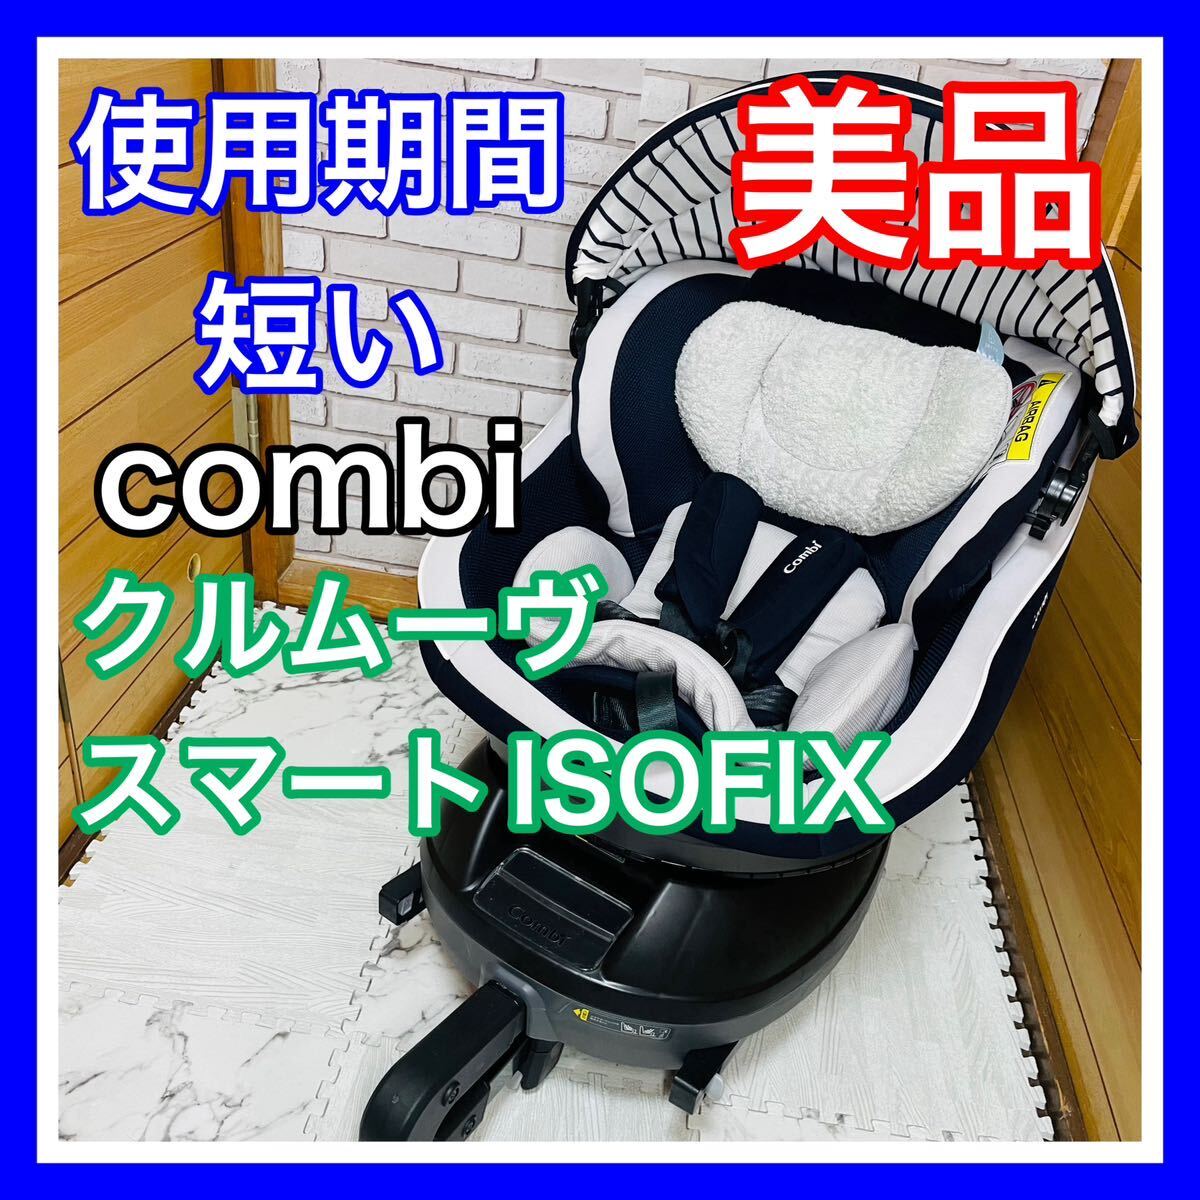  prompt decision use 4 months beautiful goods combikru Move Smart ISOFIX navy child seat postage included 5400 jpy . discounted lavatory settled combination Jk